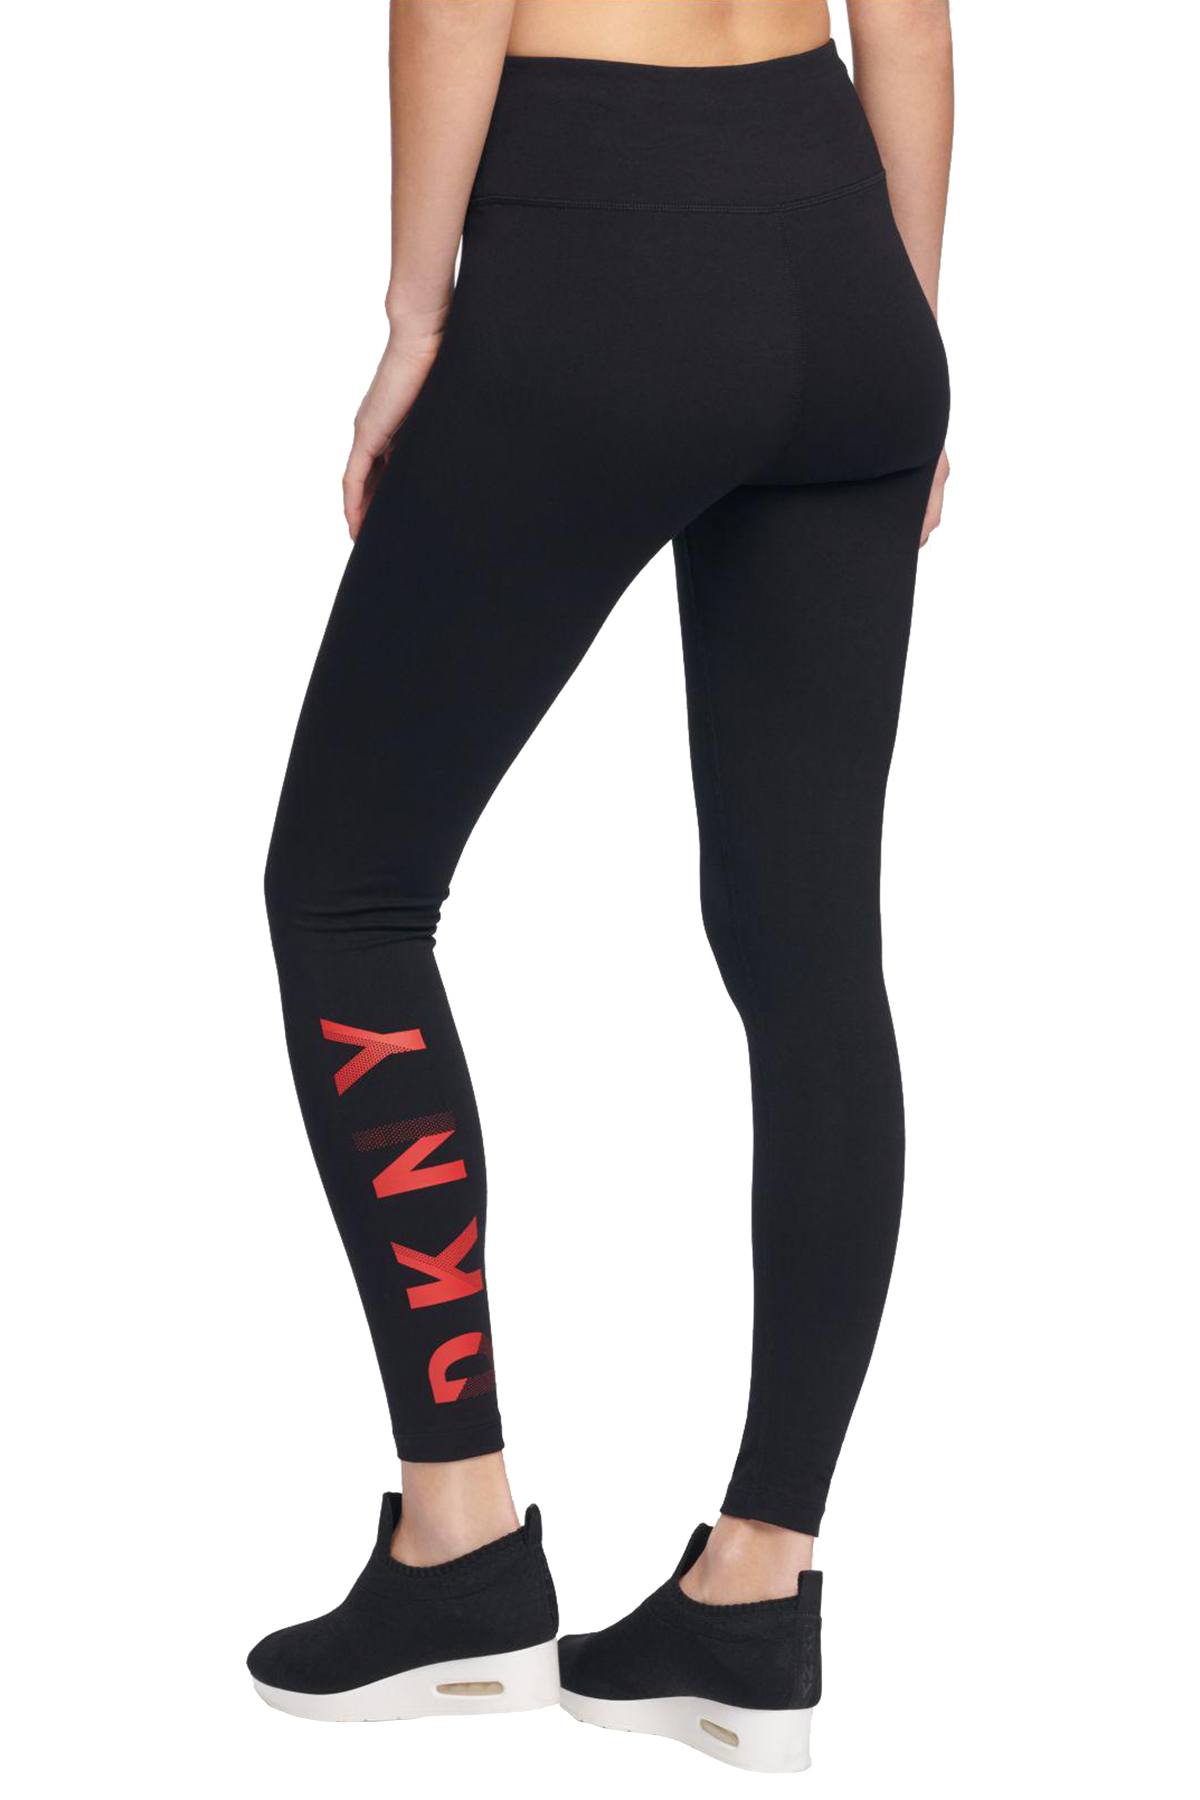 DKNY Leggings - Rose Peps/Black » Fast and Cheap Shipping